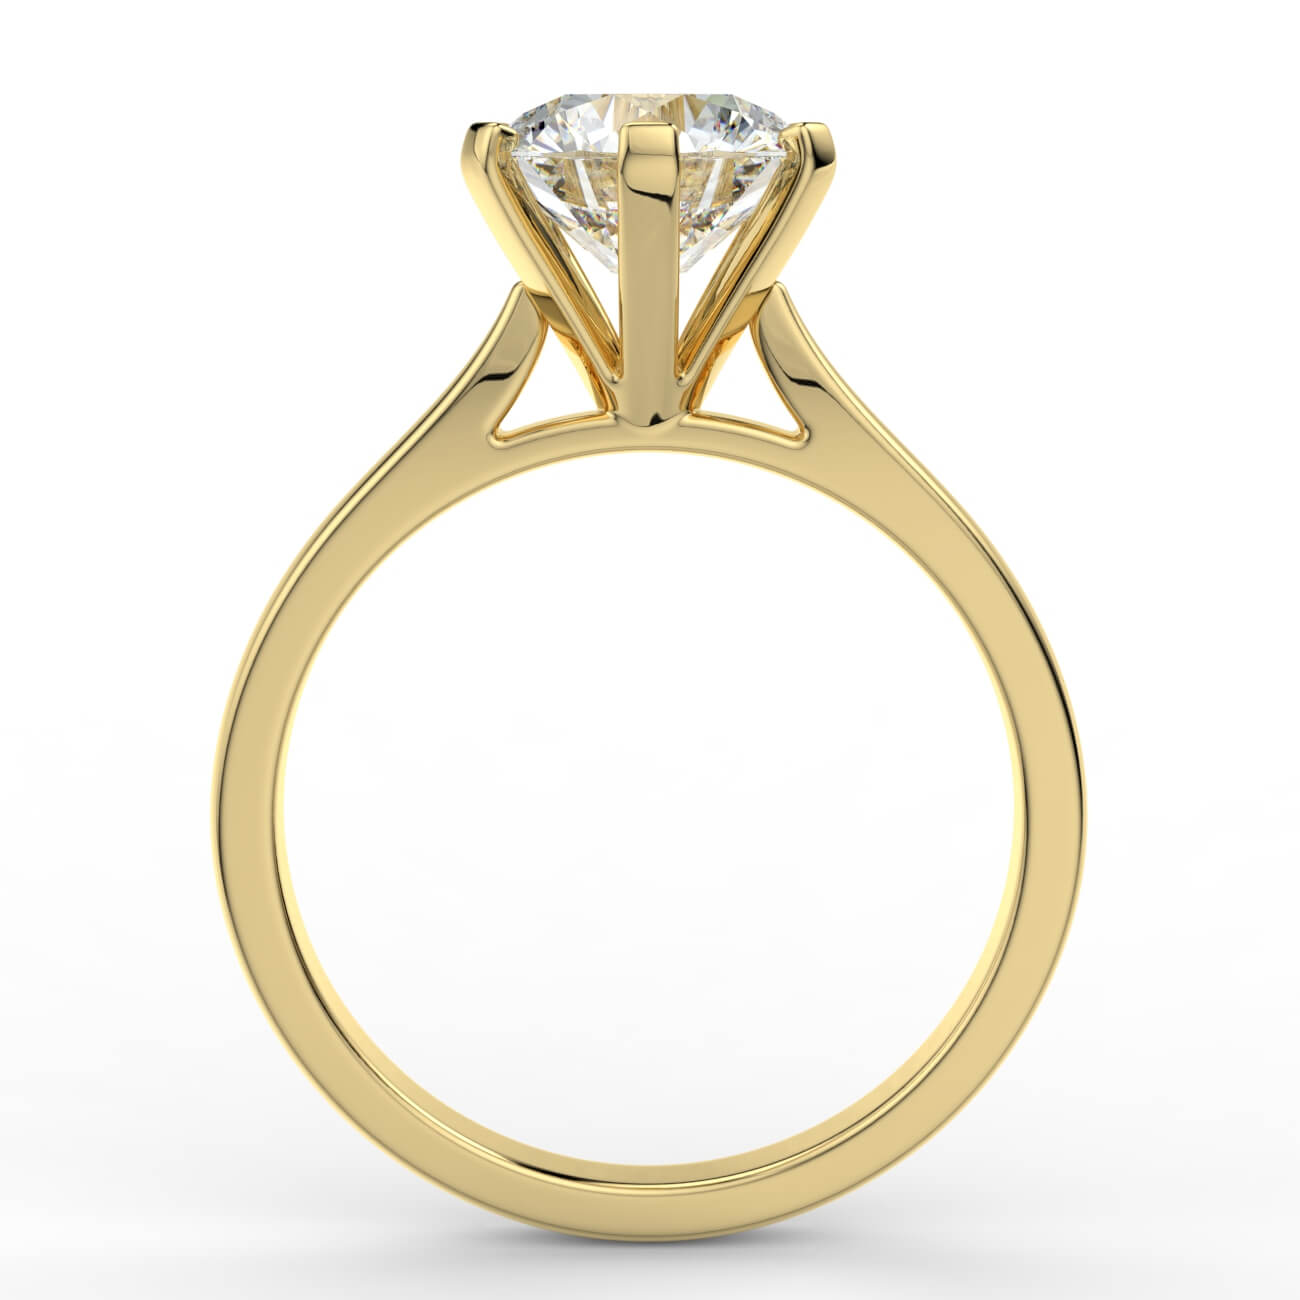 Round brilliant cut diamond cathedral engagement ring in yellow gold – Australian Diamond Network